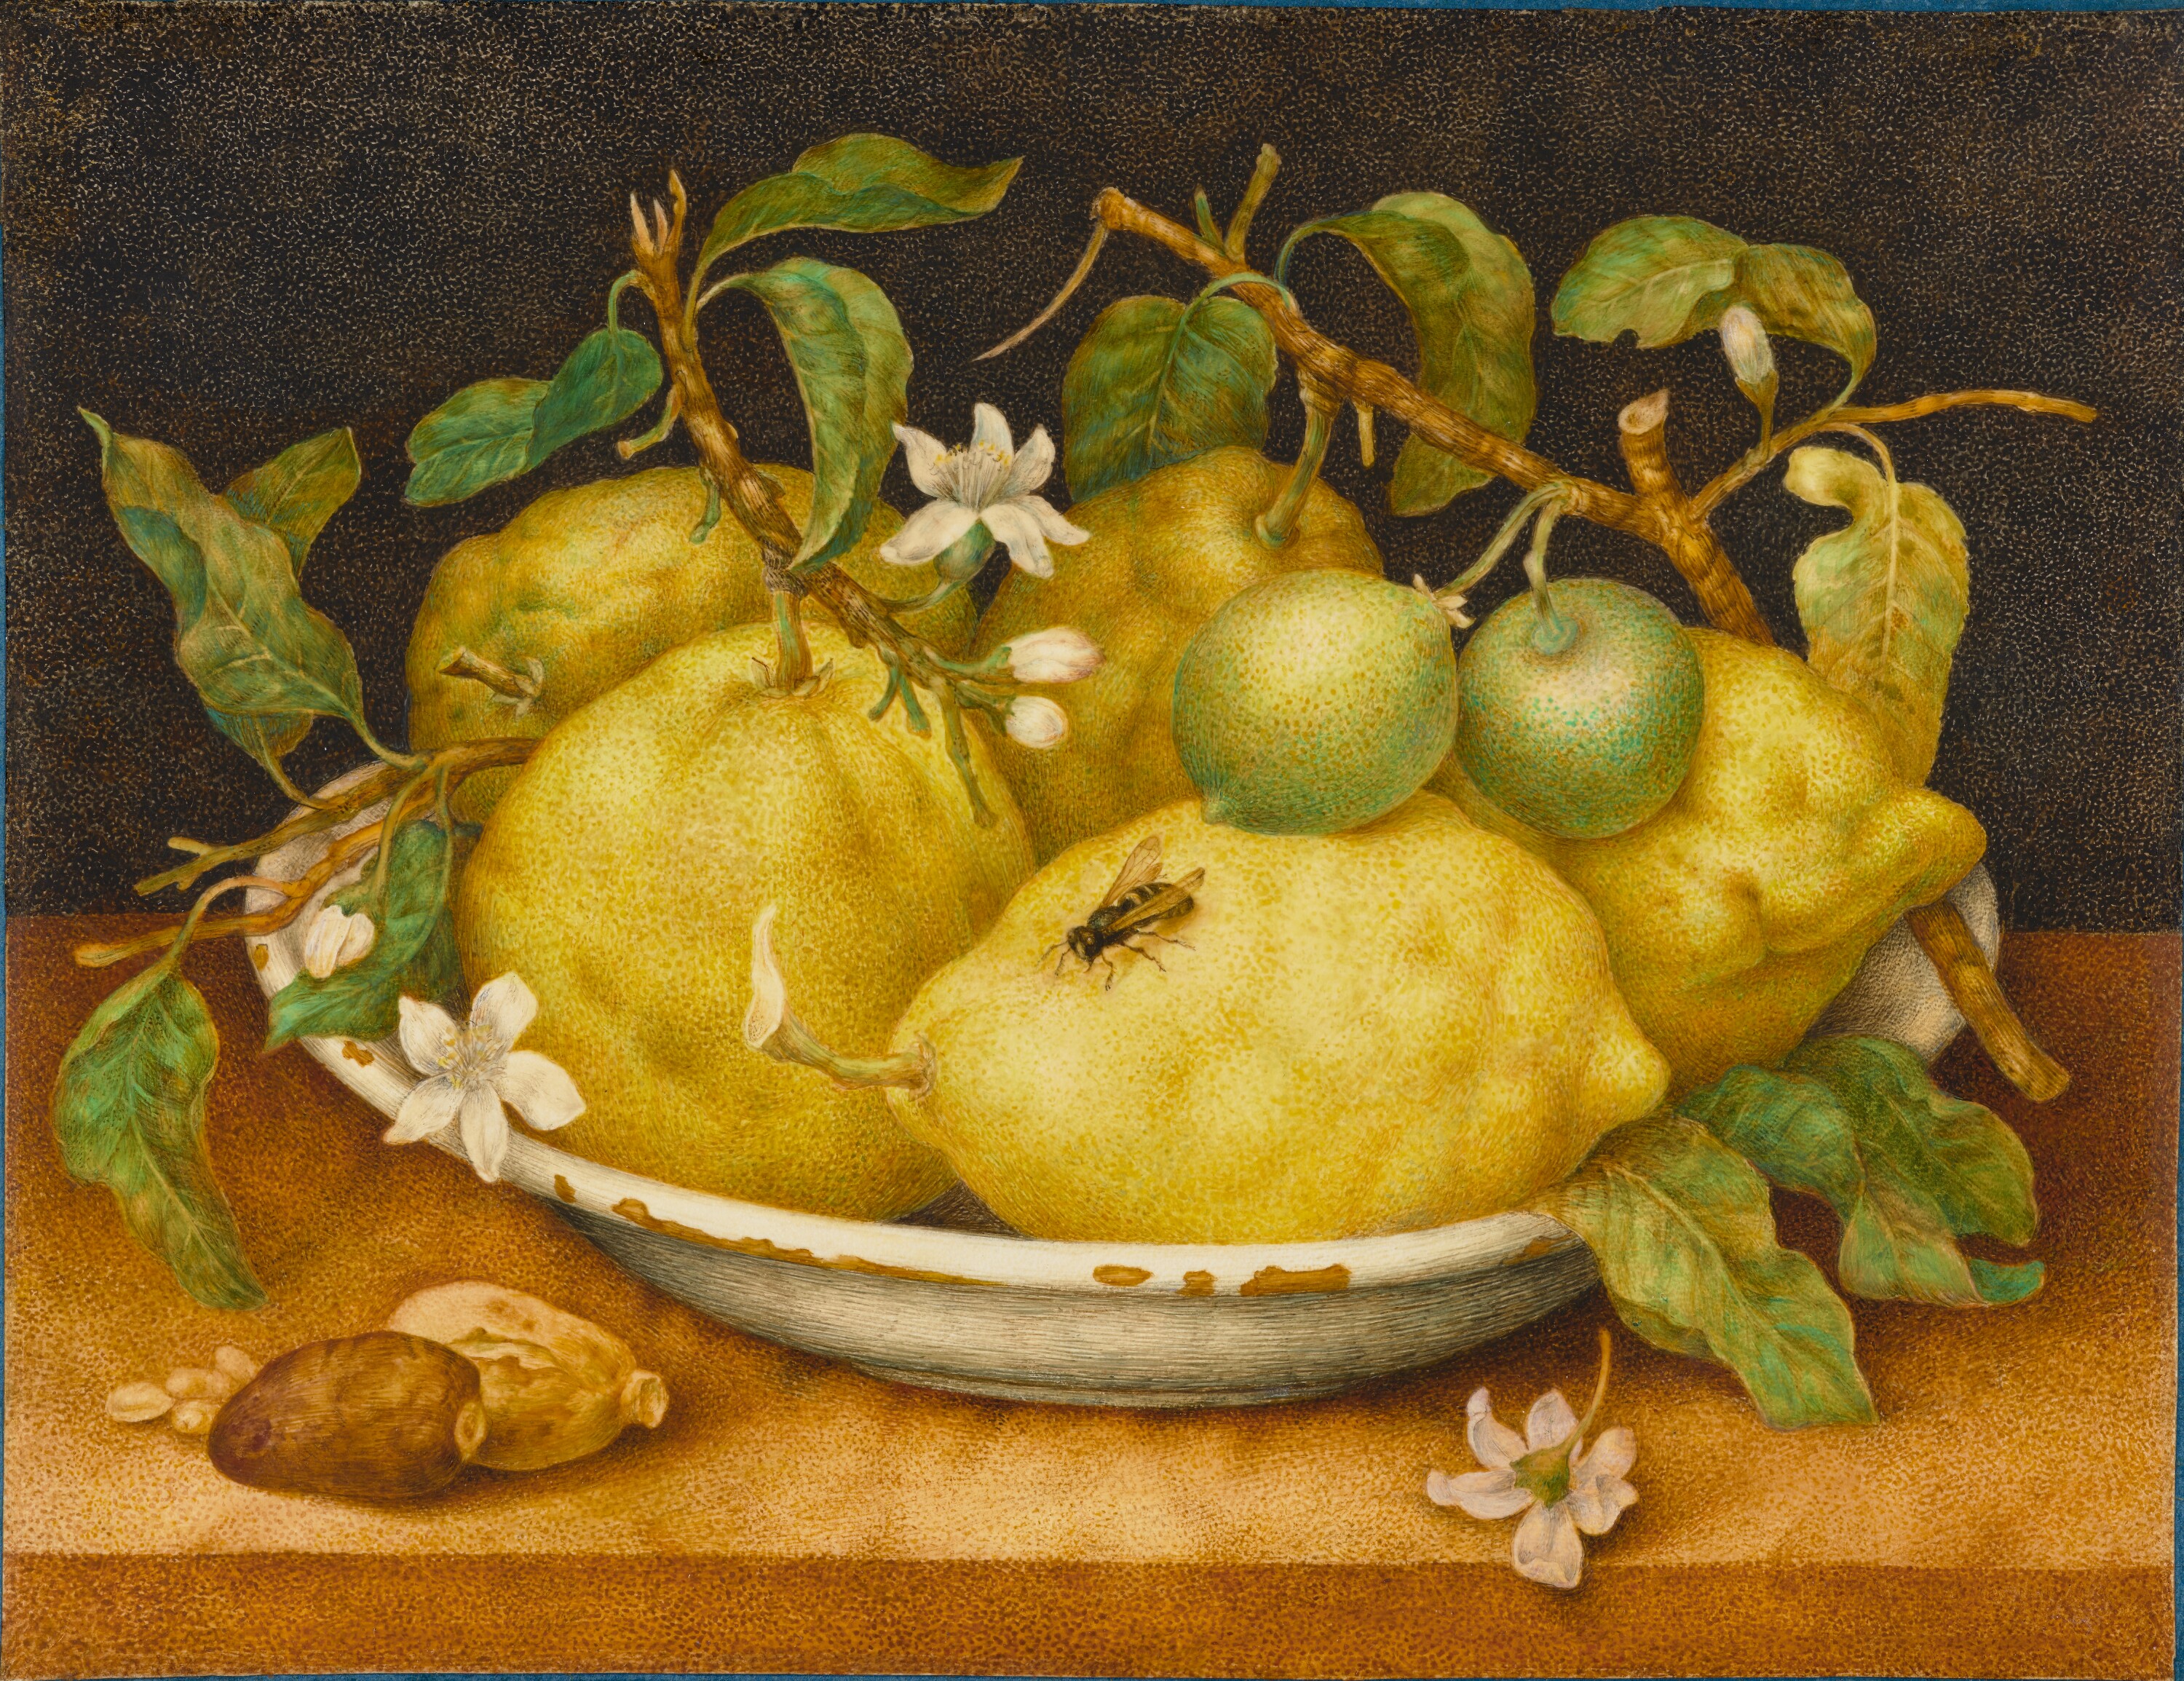 A still life painting of lemons in a white ceramic bowls. Two of the lemons are still green and there are blossoms still attached to the stem and branches. A bee is sitting on one lemon at the center of the composition. The bowl is positioned on a brown table with a dark, neutral background. 